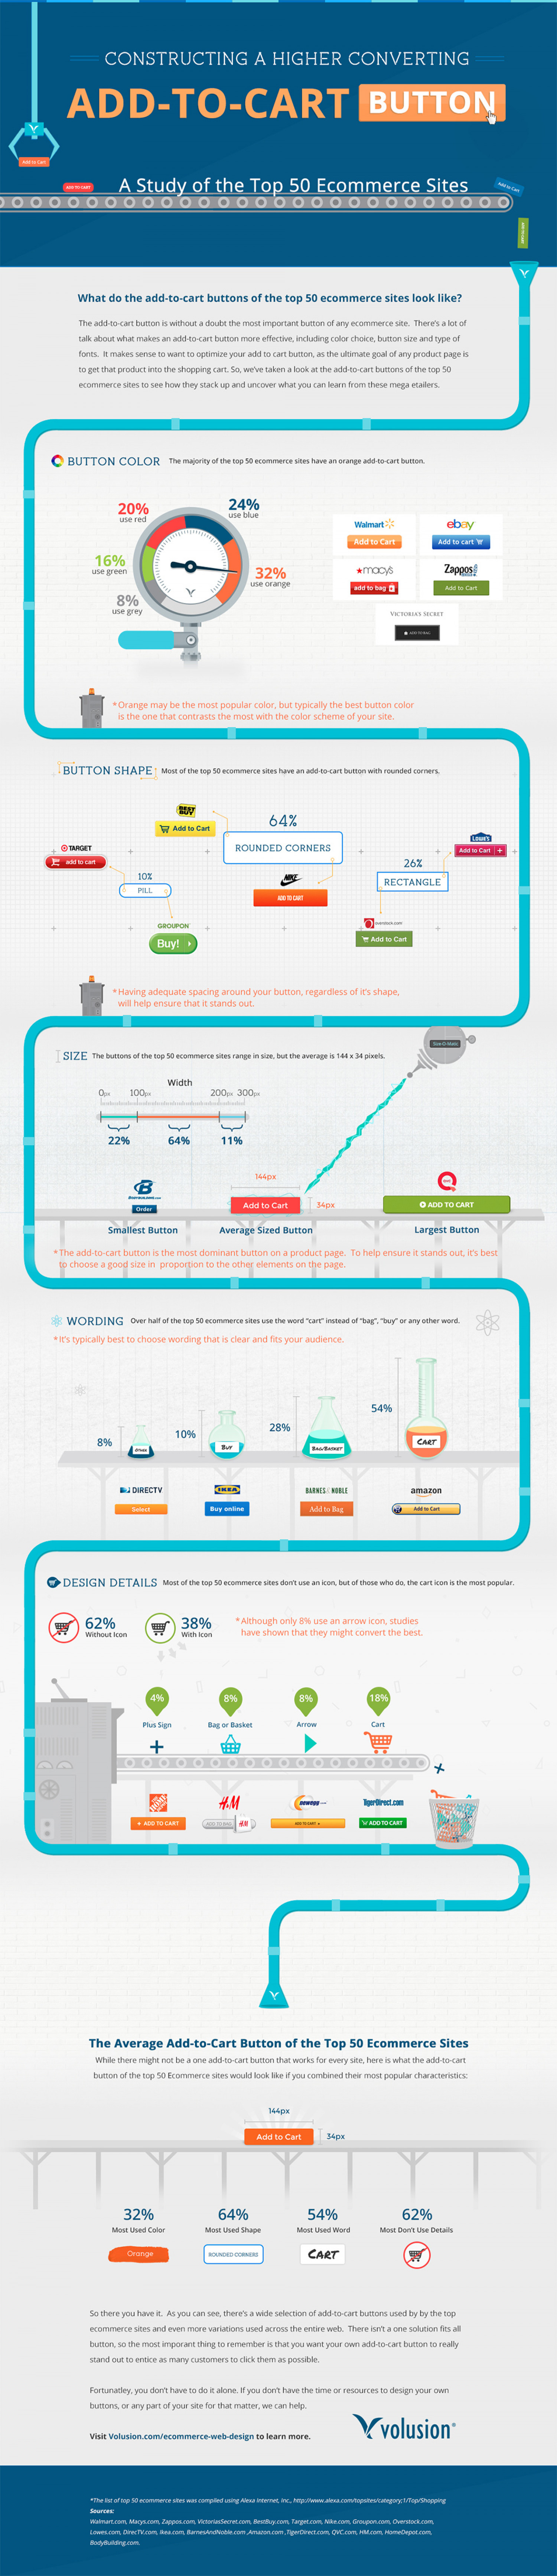 Constructing a Higher Converting Add-to-Cart Button Infographic